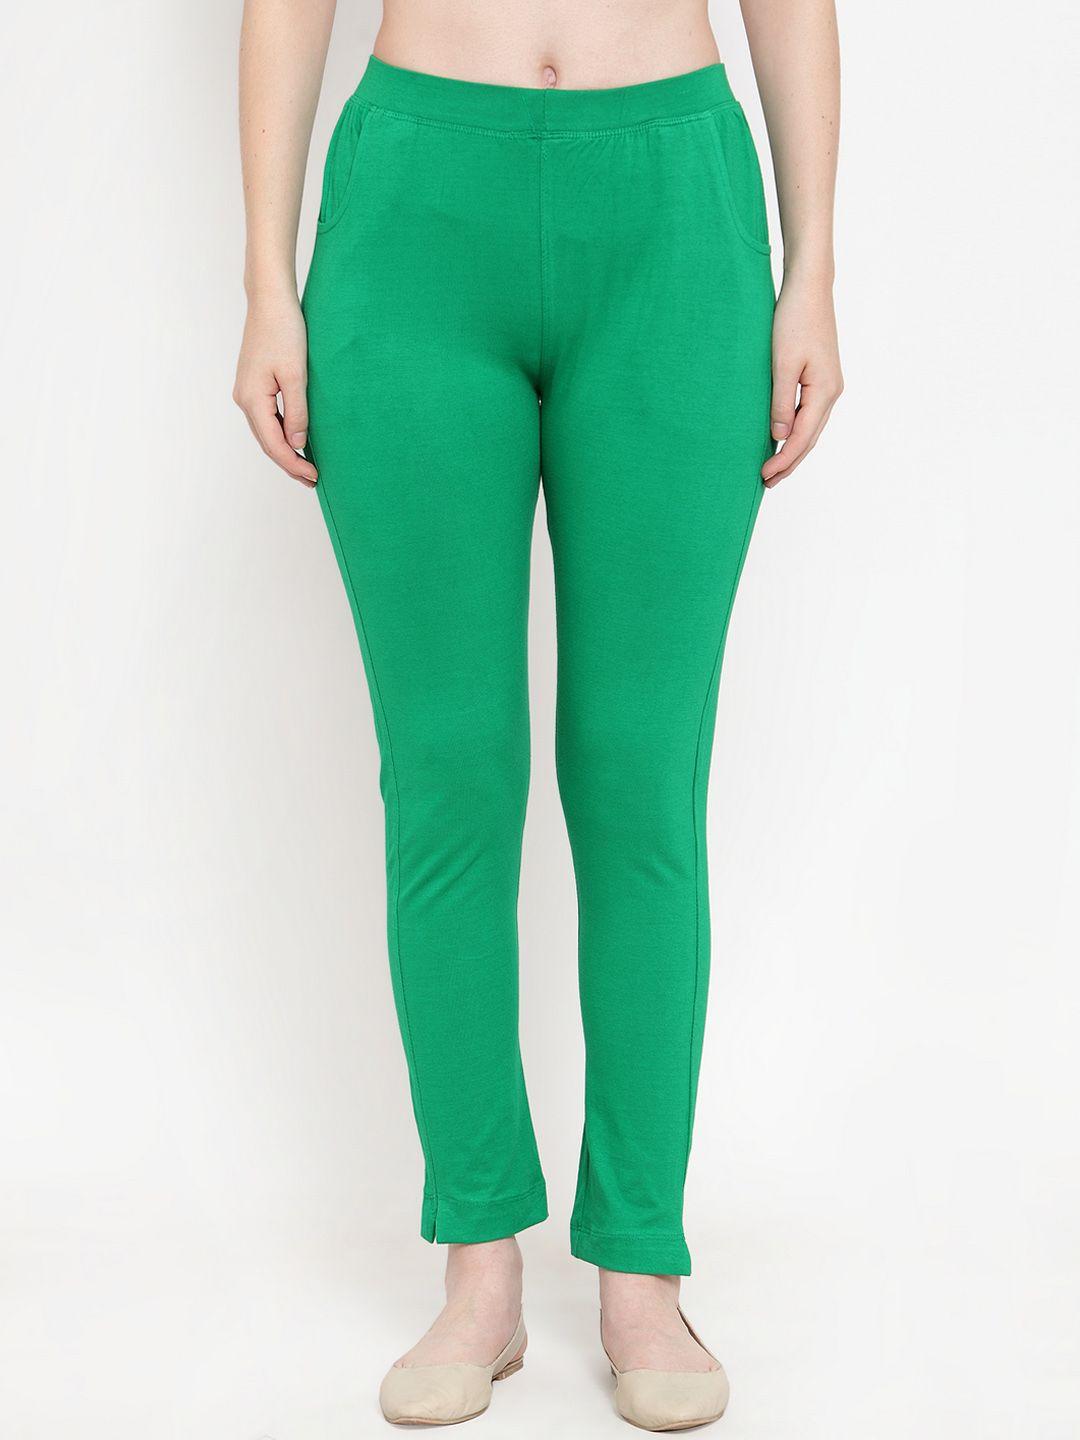 tag 7 women green solid ankle-length leggings